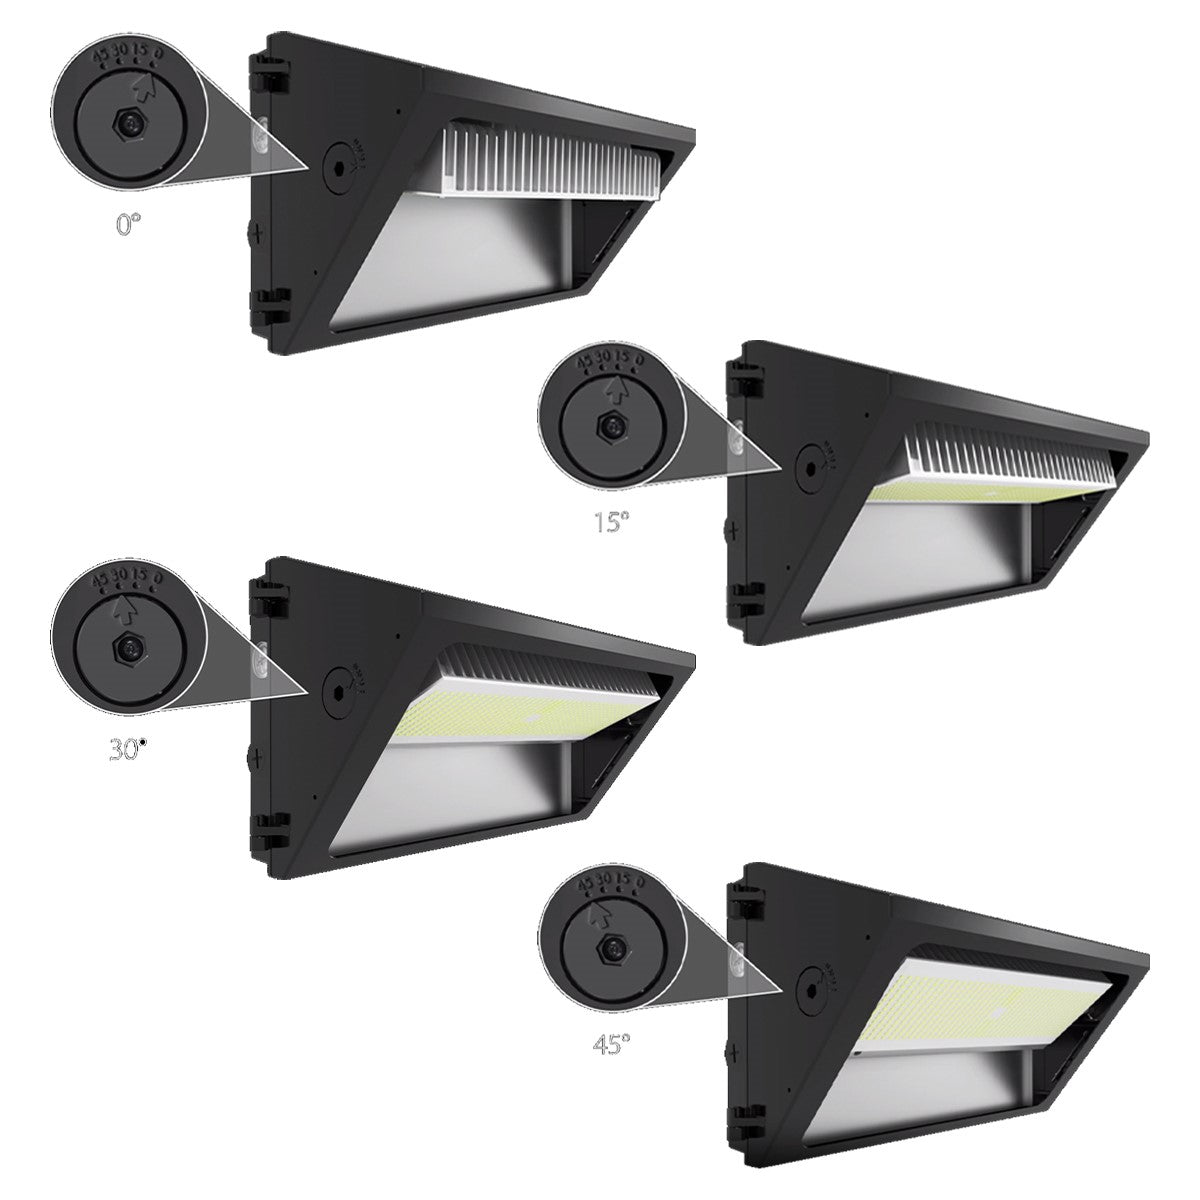 LED Standard Wall Pack With Photocell, 14000 Lumens, 50-100 Adjustable Wattage, Selectable CCT 30K/40K/50K, 120/277V, Adjustable Throw - Bees Lighting